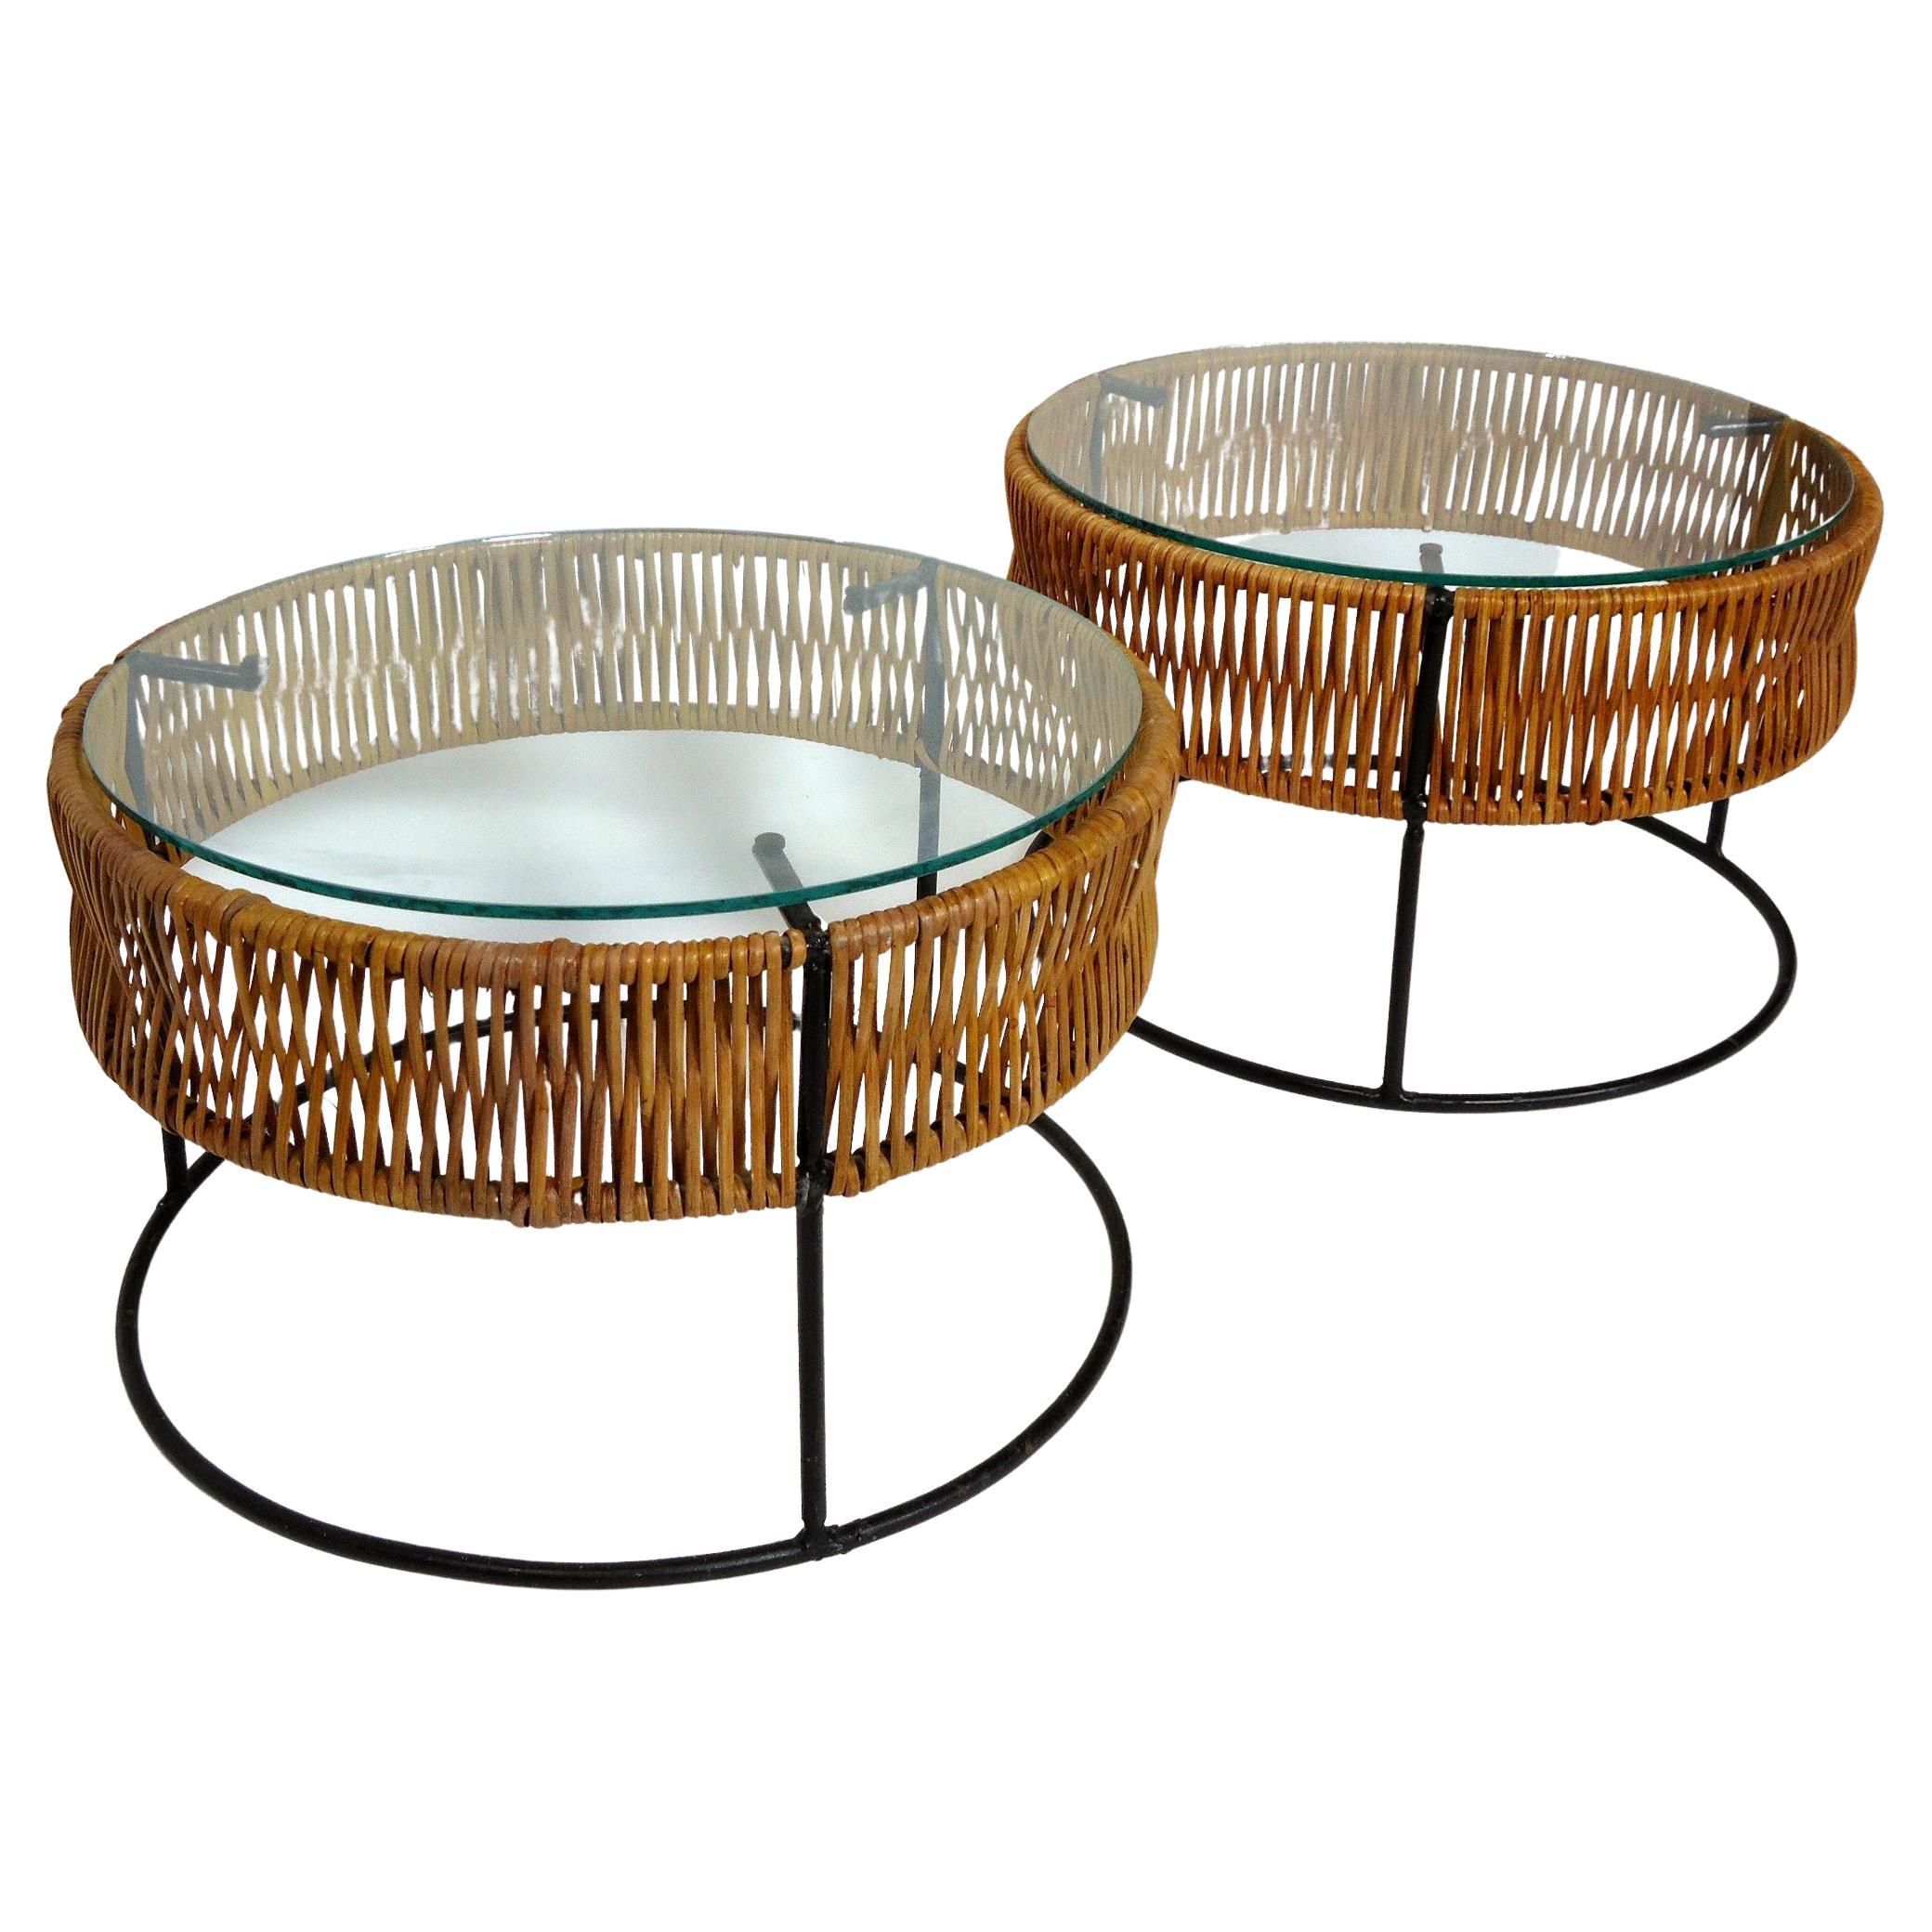 Pair of Wrought Iron and Bamboo End Tables / Stools Arthur Umanoff 1960